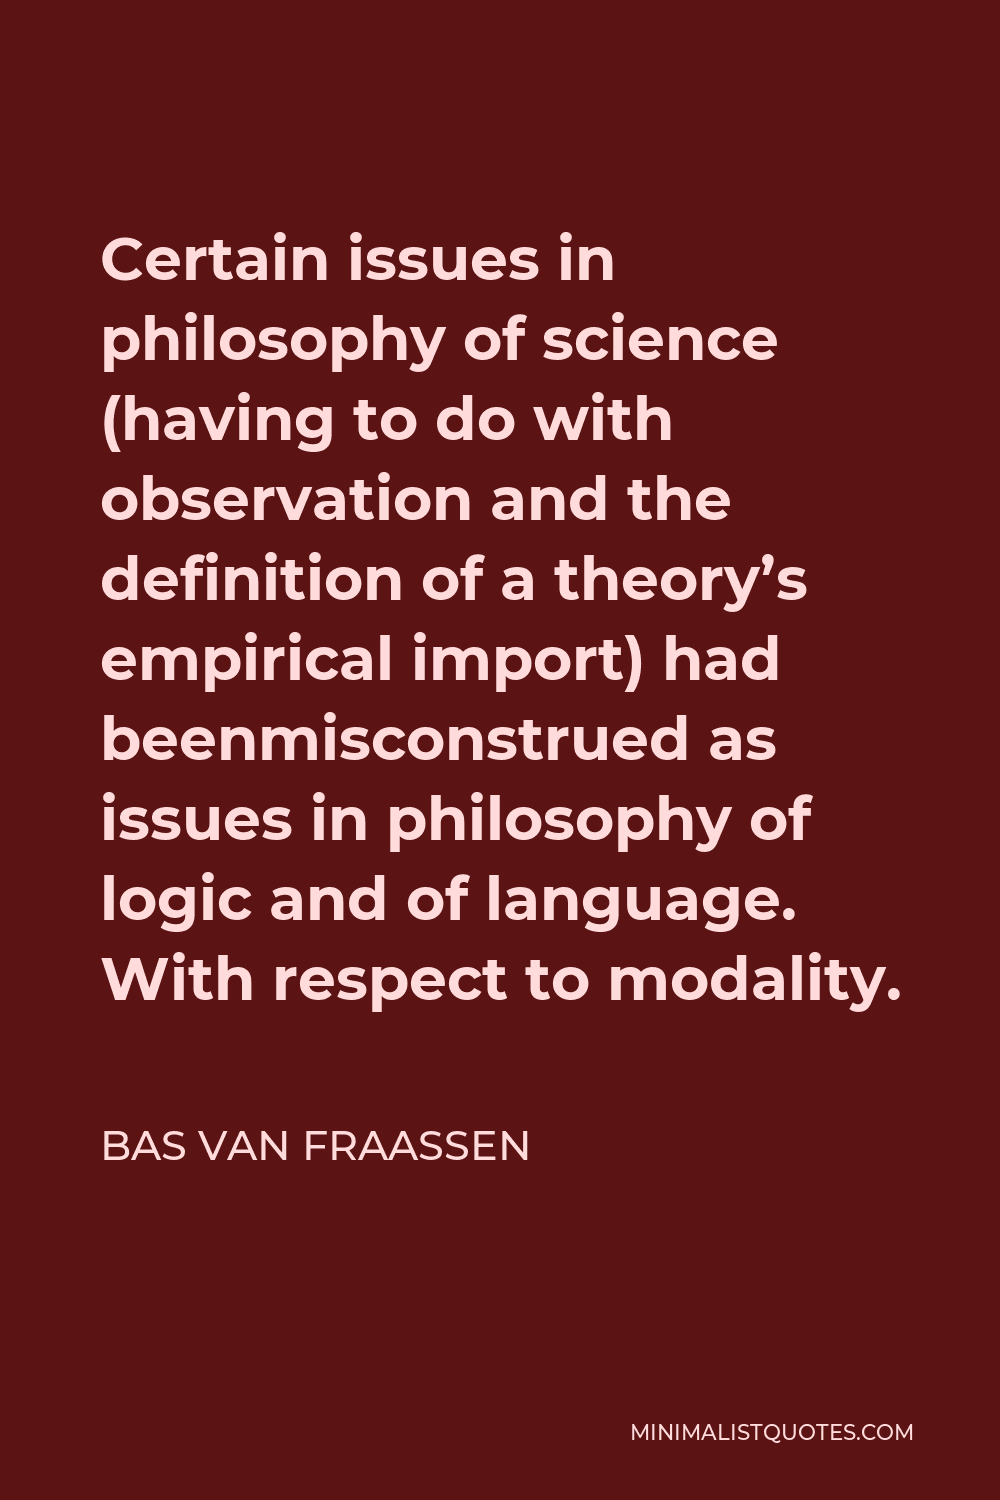 Bas van Fraassen Quote - Certain issues in philosophy of science (having to do with observation and the definition of a theory’s empirical import) had beenmisconstrued as issues in philosophy of logic and of language. With respect to modality.